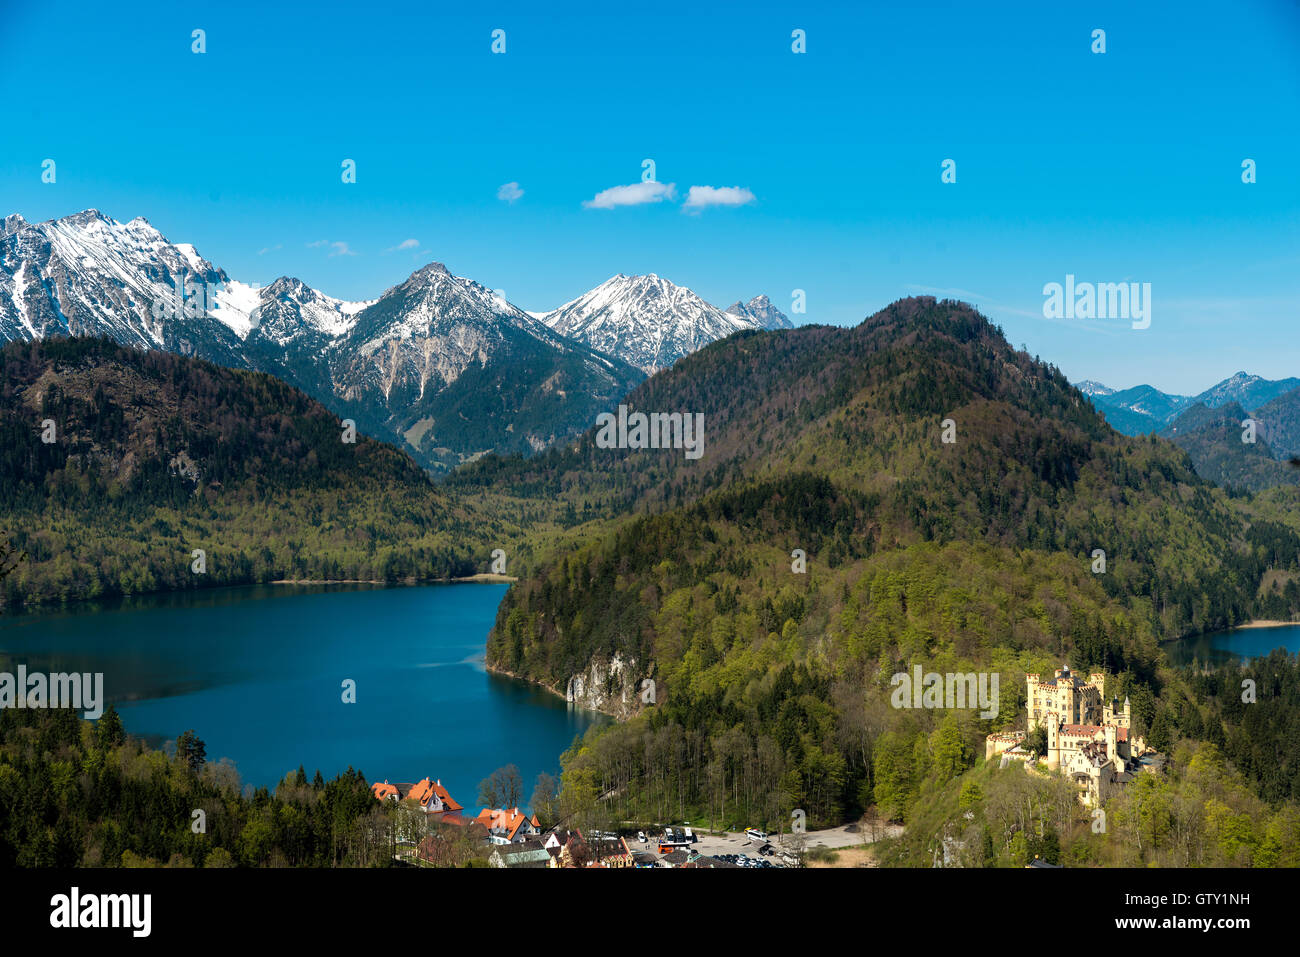 Castle Hohenschwangau with lake and europe alps in background at Munich, Germany. Stock Photo